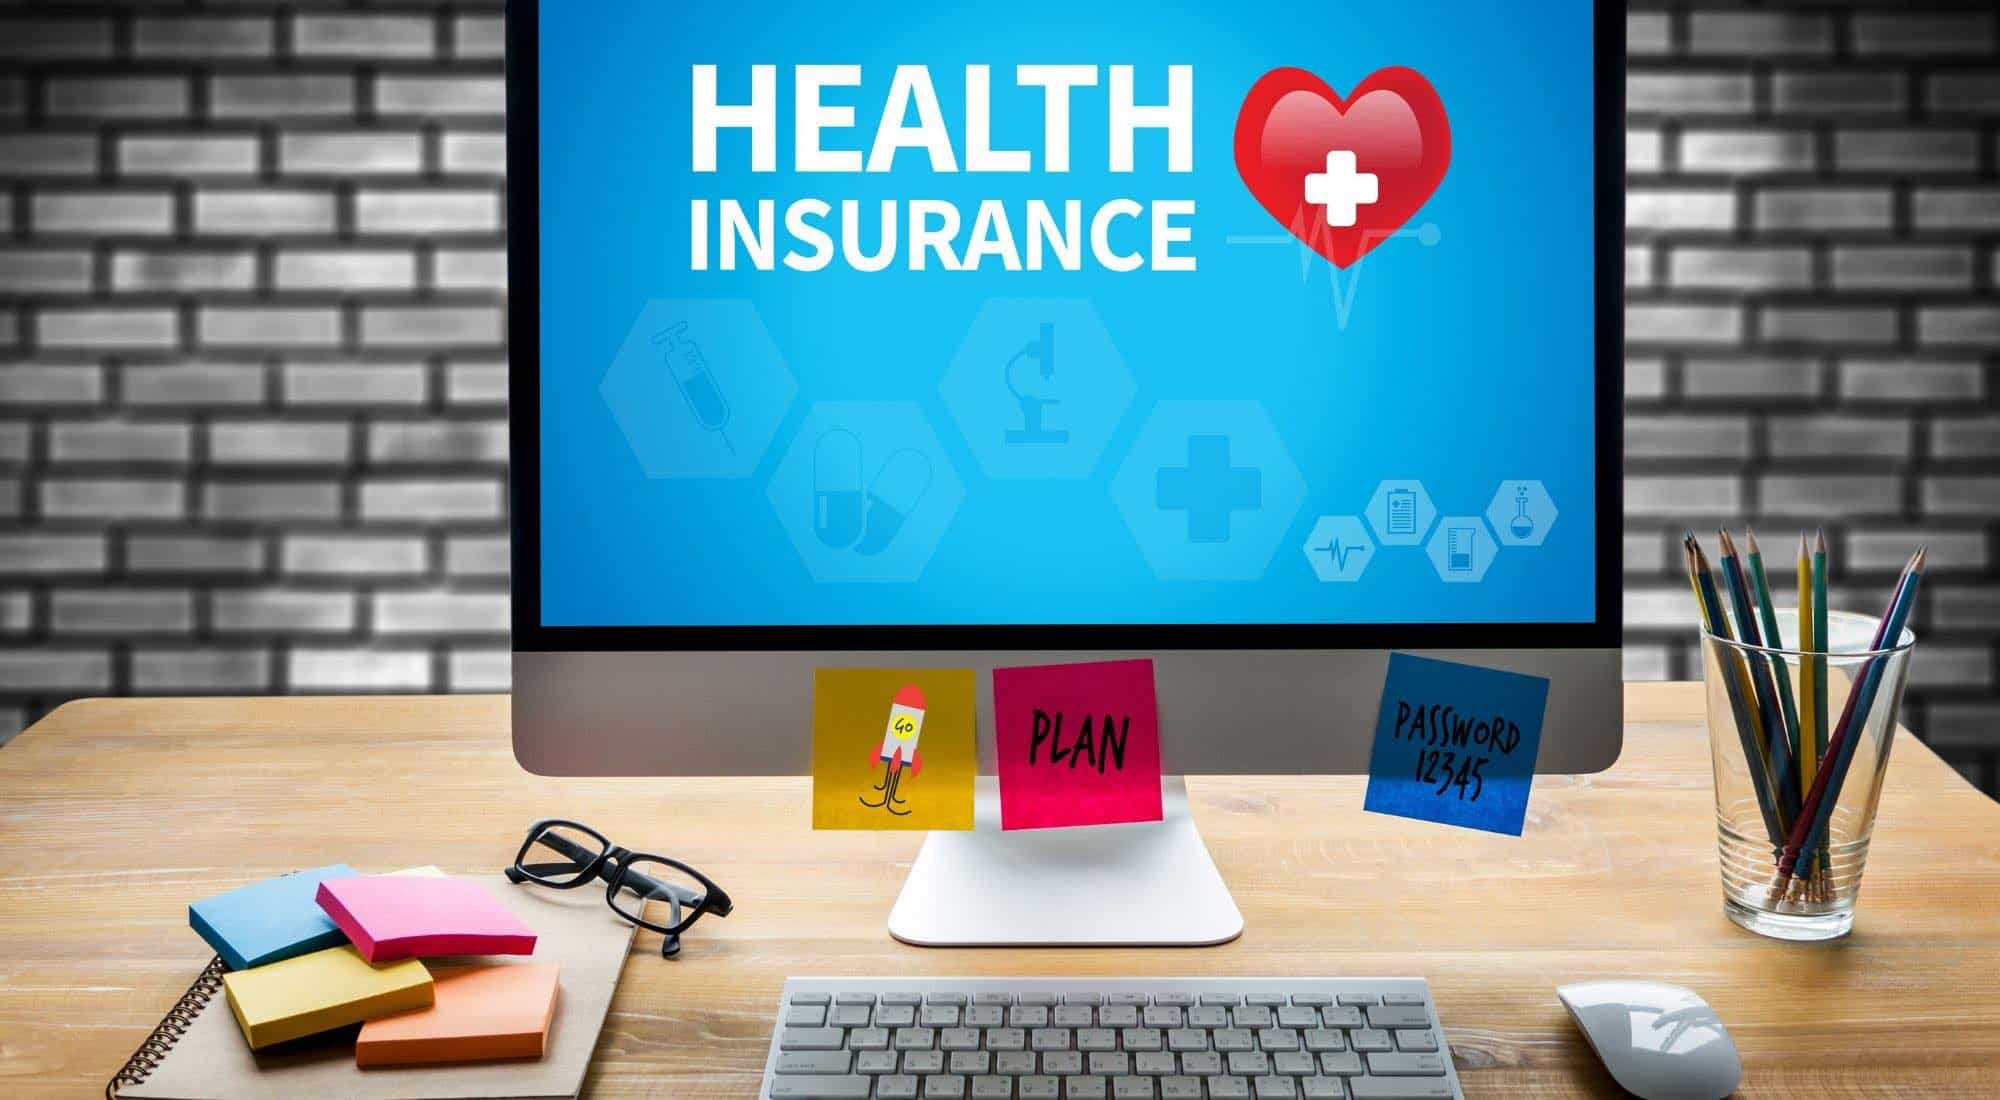 How to Pick the Best Health Insurance Plan: 4 Easy Ways To Choose The Best One - Las Vegas Individual & Group Health Insurance Plans - Call Now (702) 258-1995